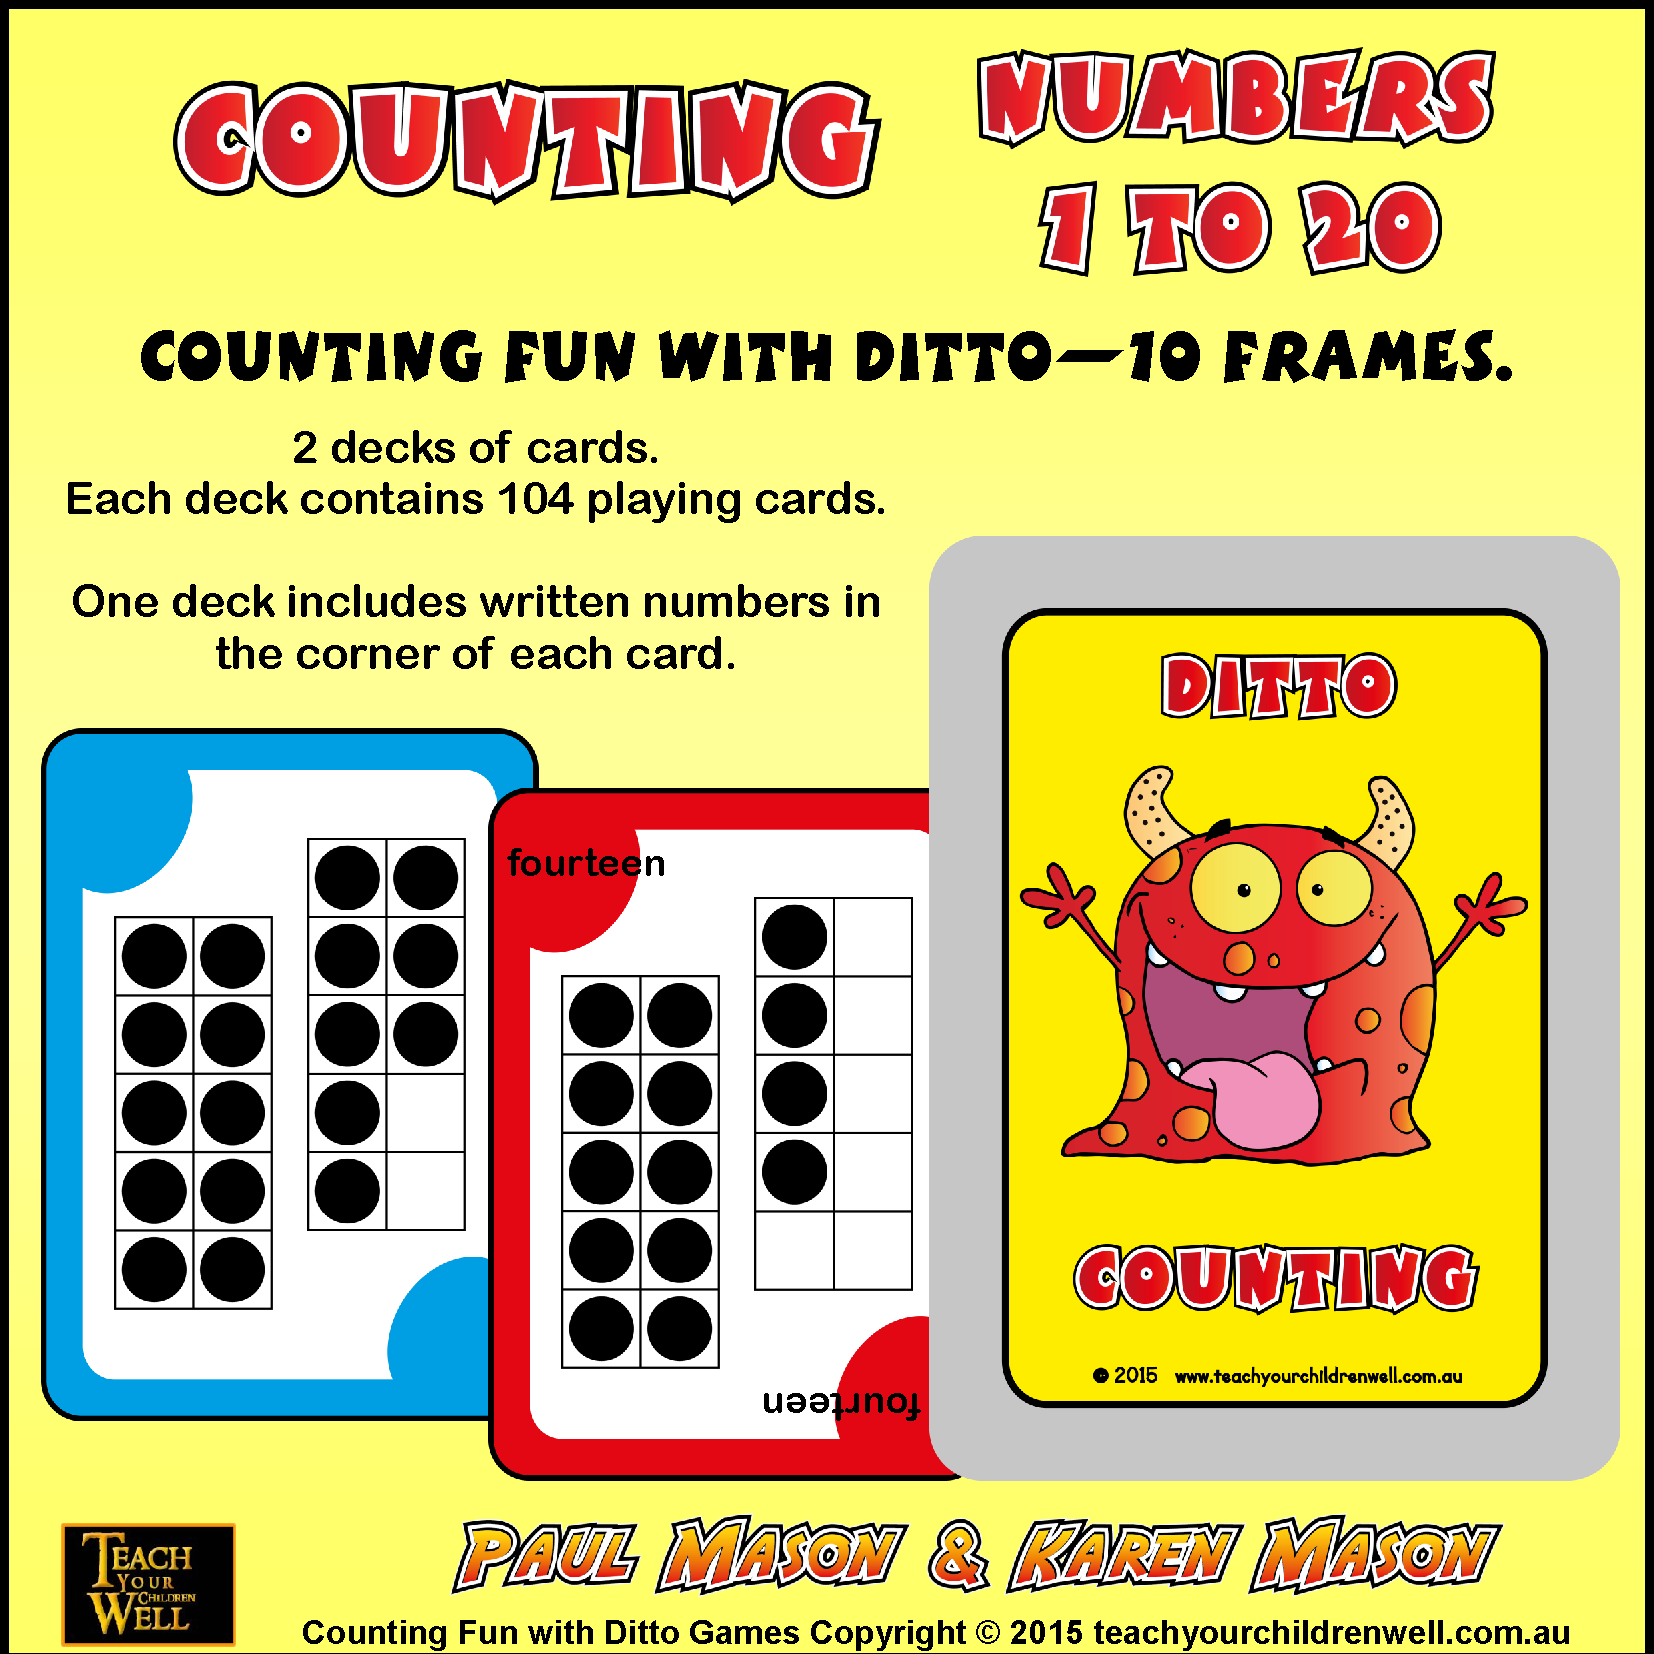 COUNTING NUMBERS 1 TO 20 WITH DITTO